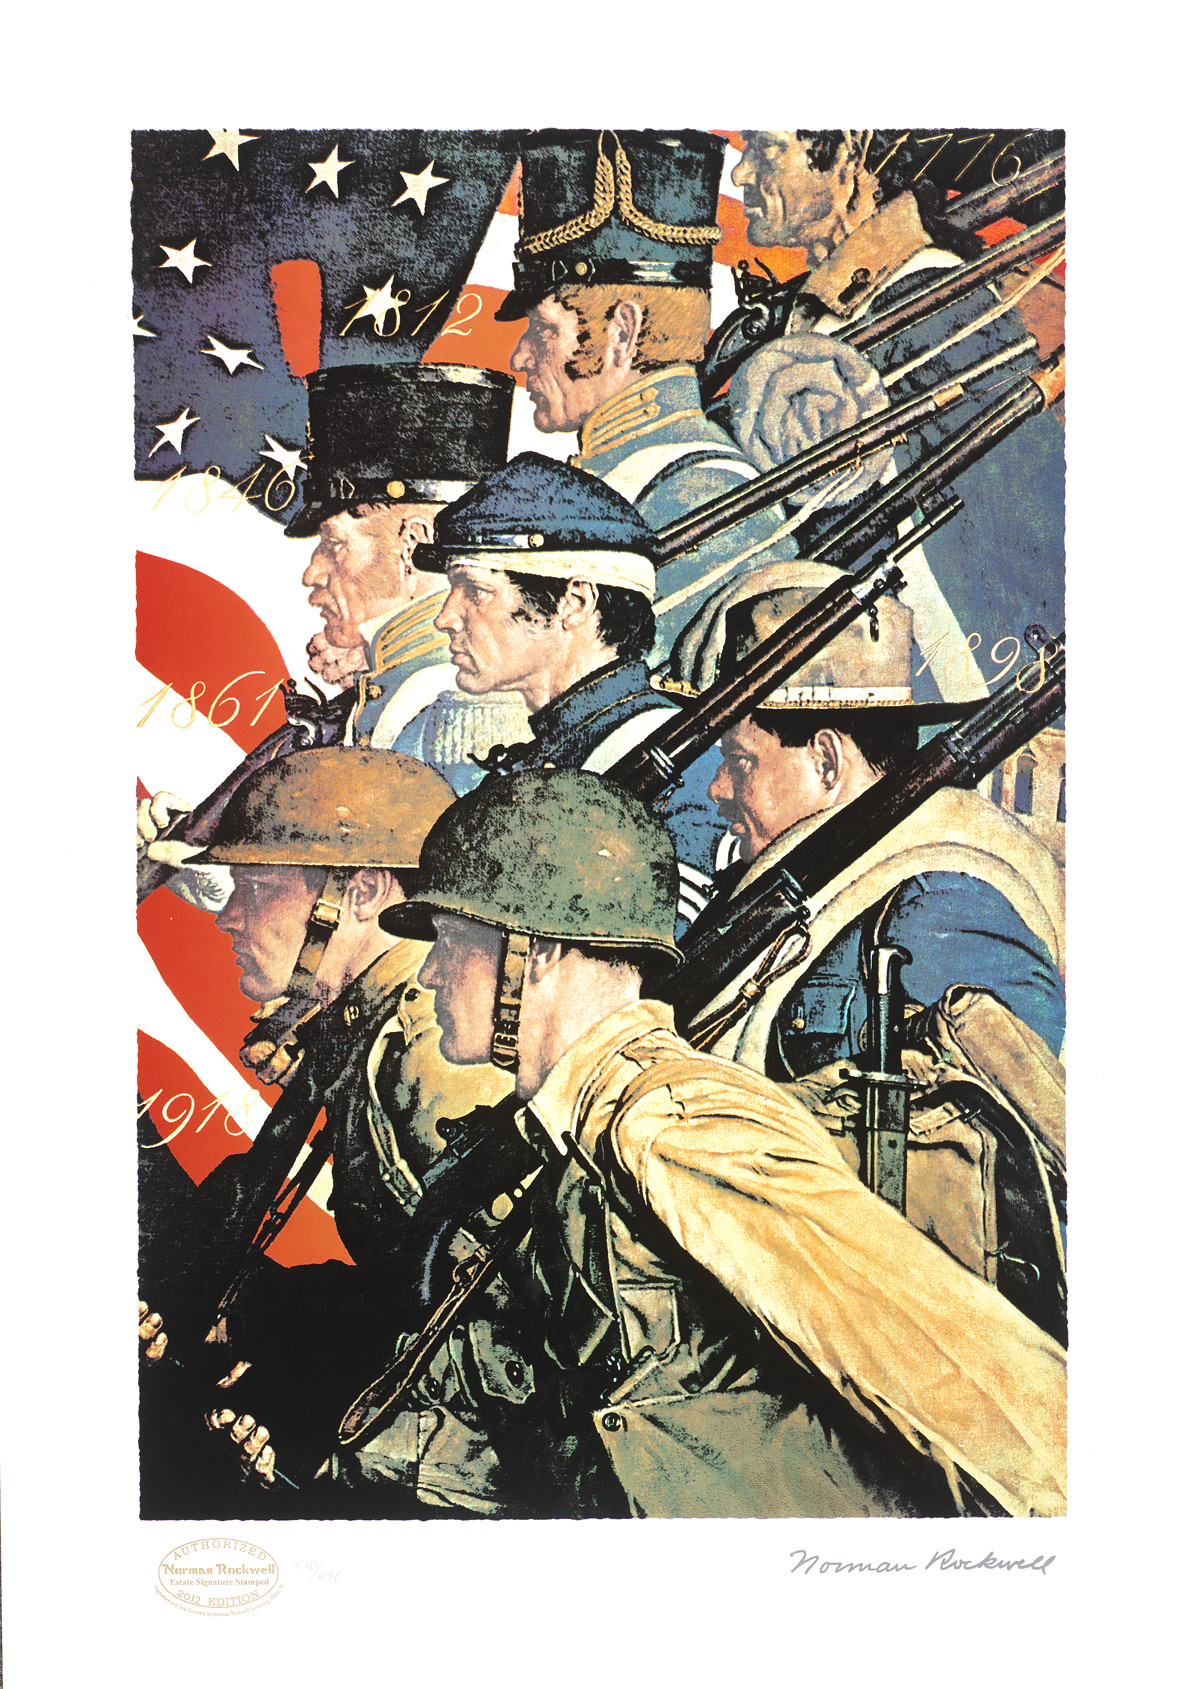 "A Pictorial History of the United States Army" (2012) Norman Rockwell